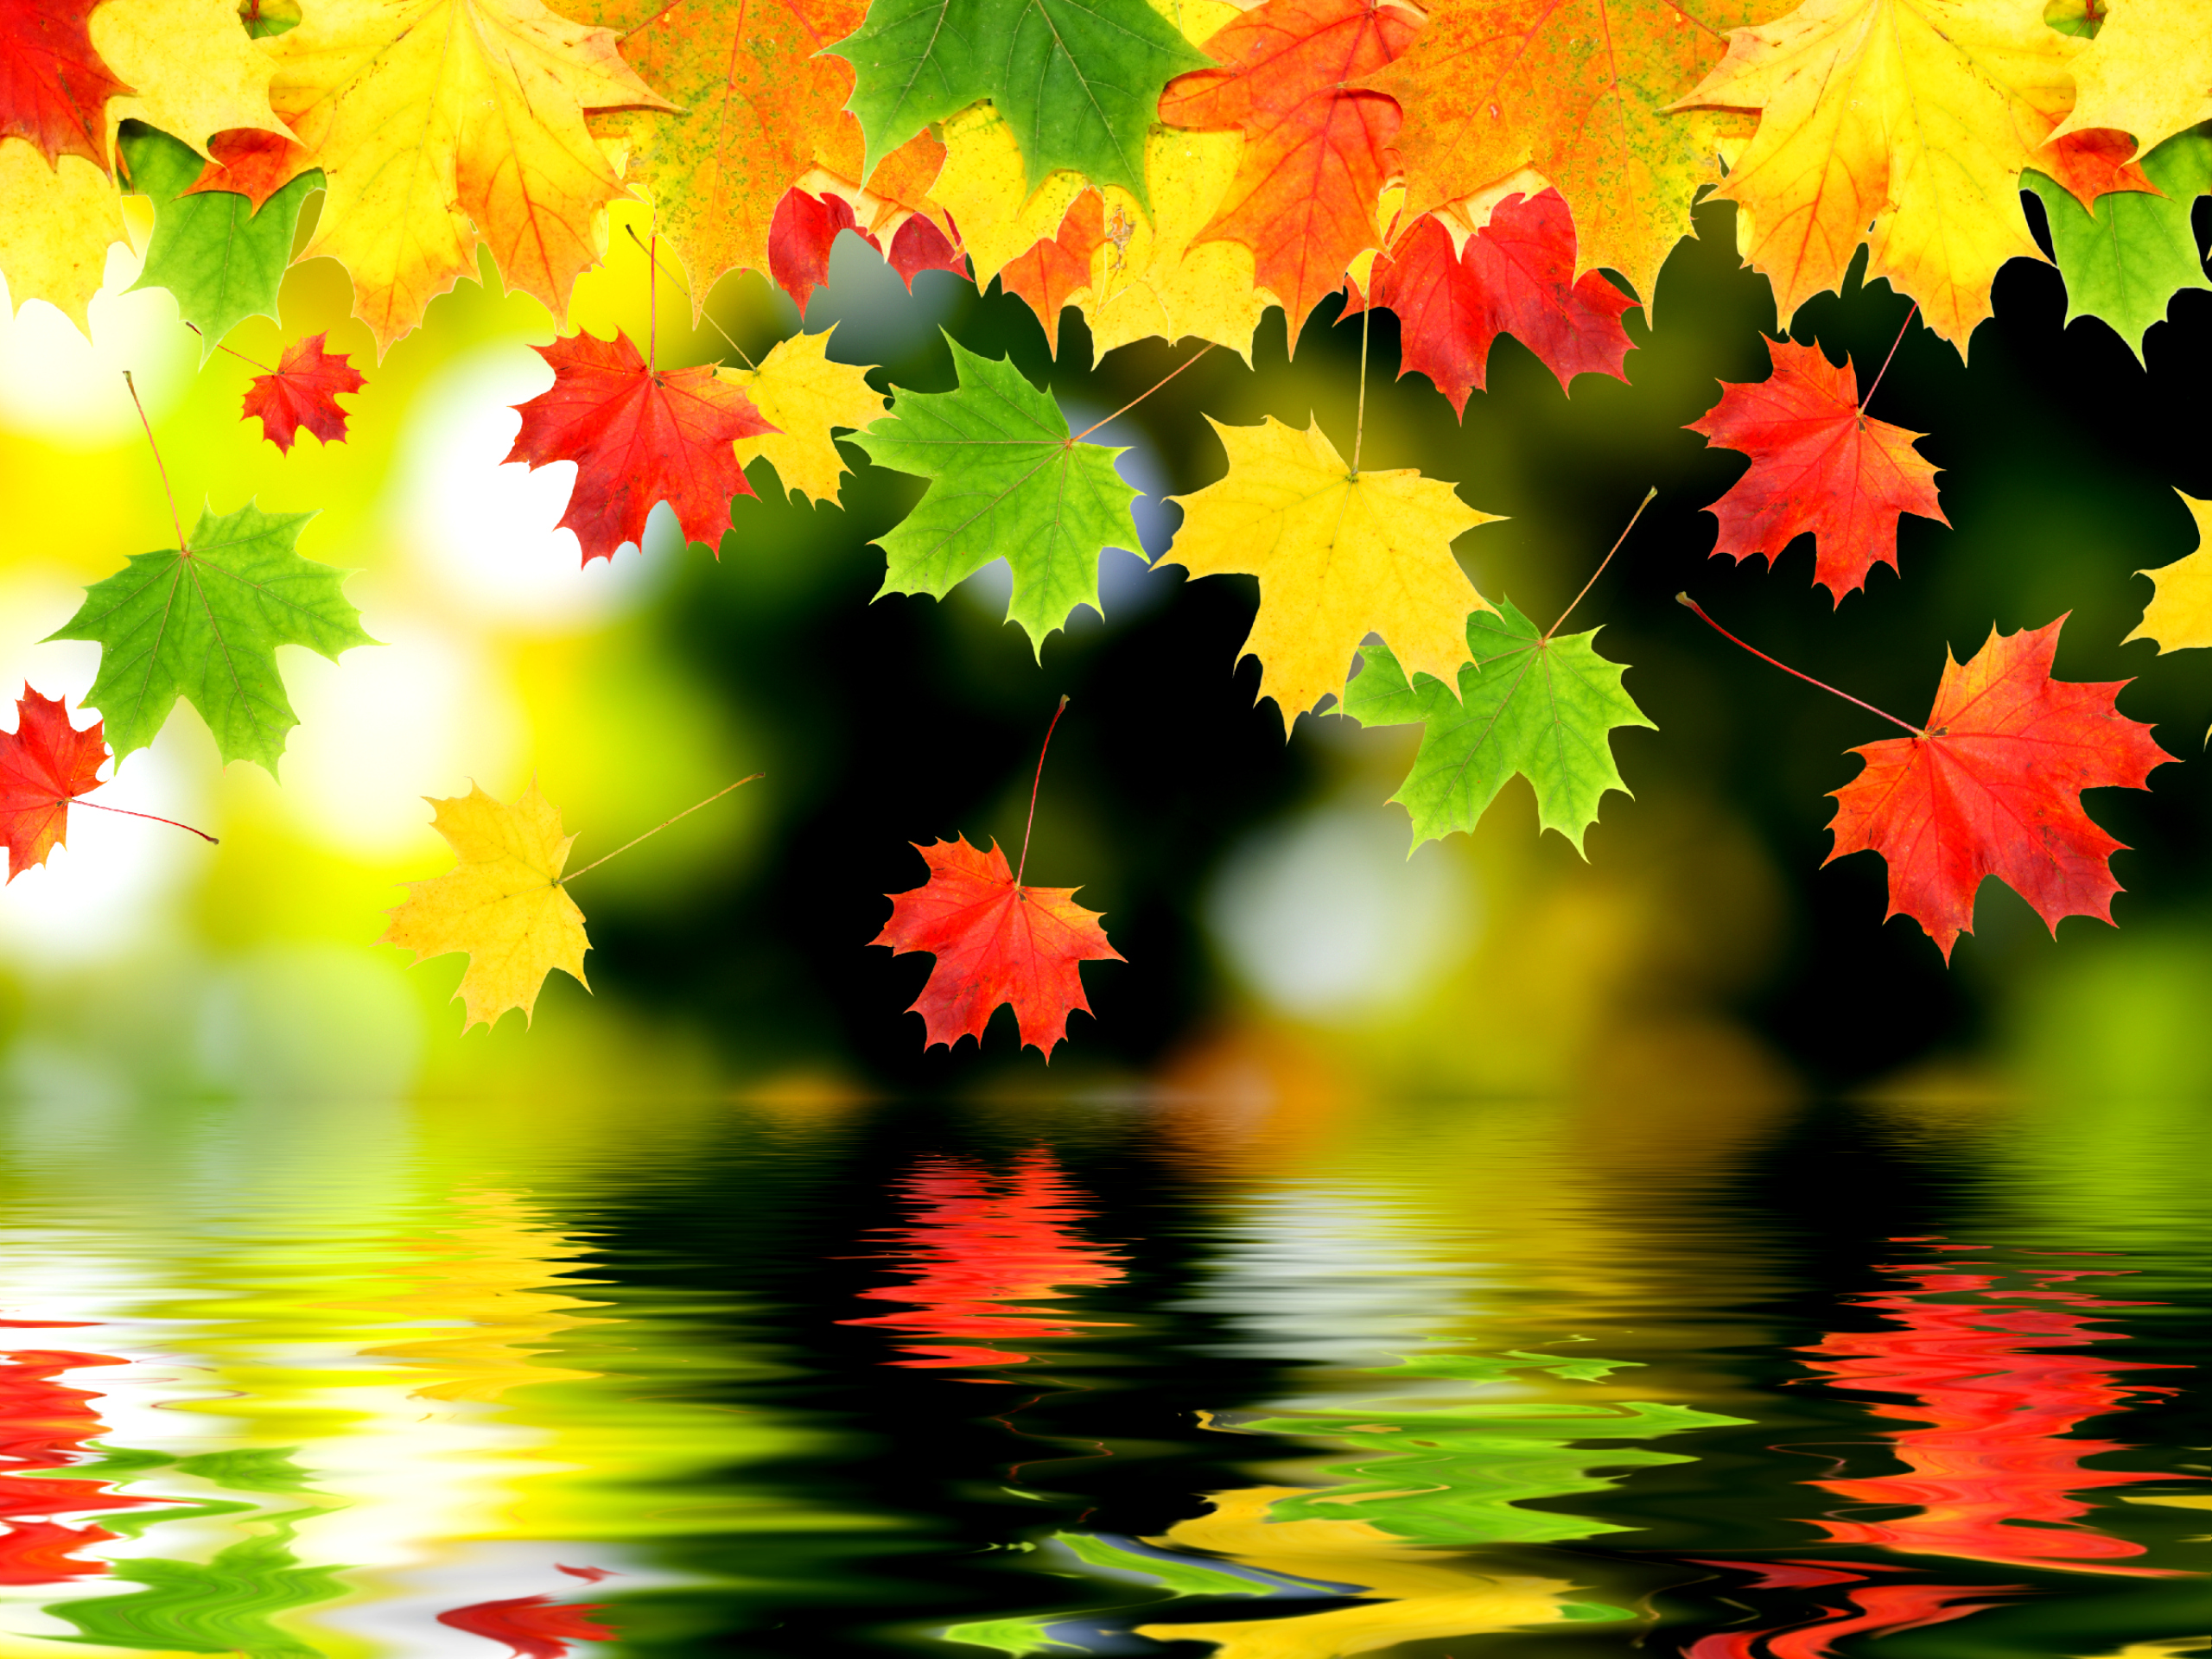 Autumn Leaves Falling - Wallpaper, High Definition, High Quality, Widescreen